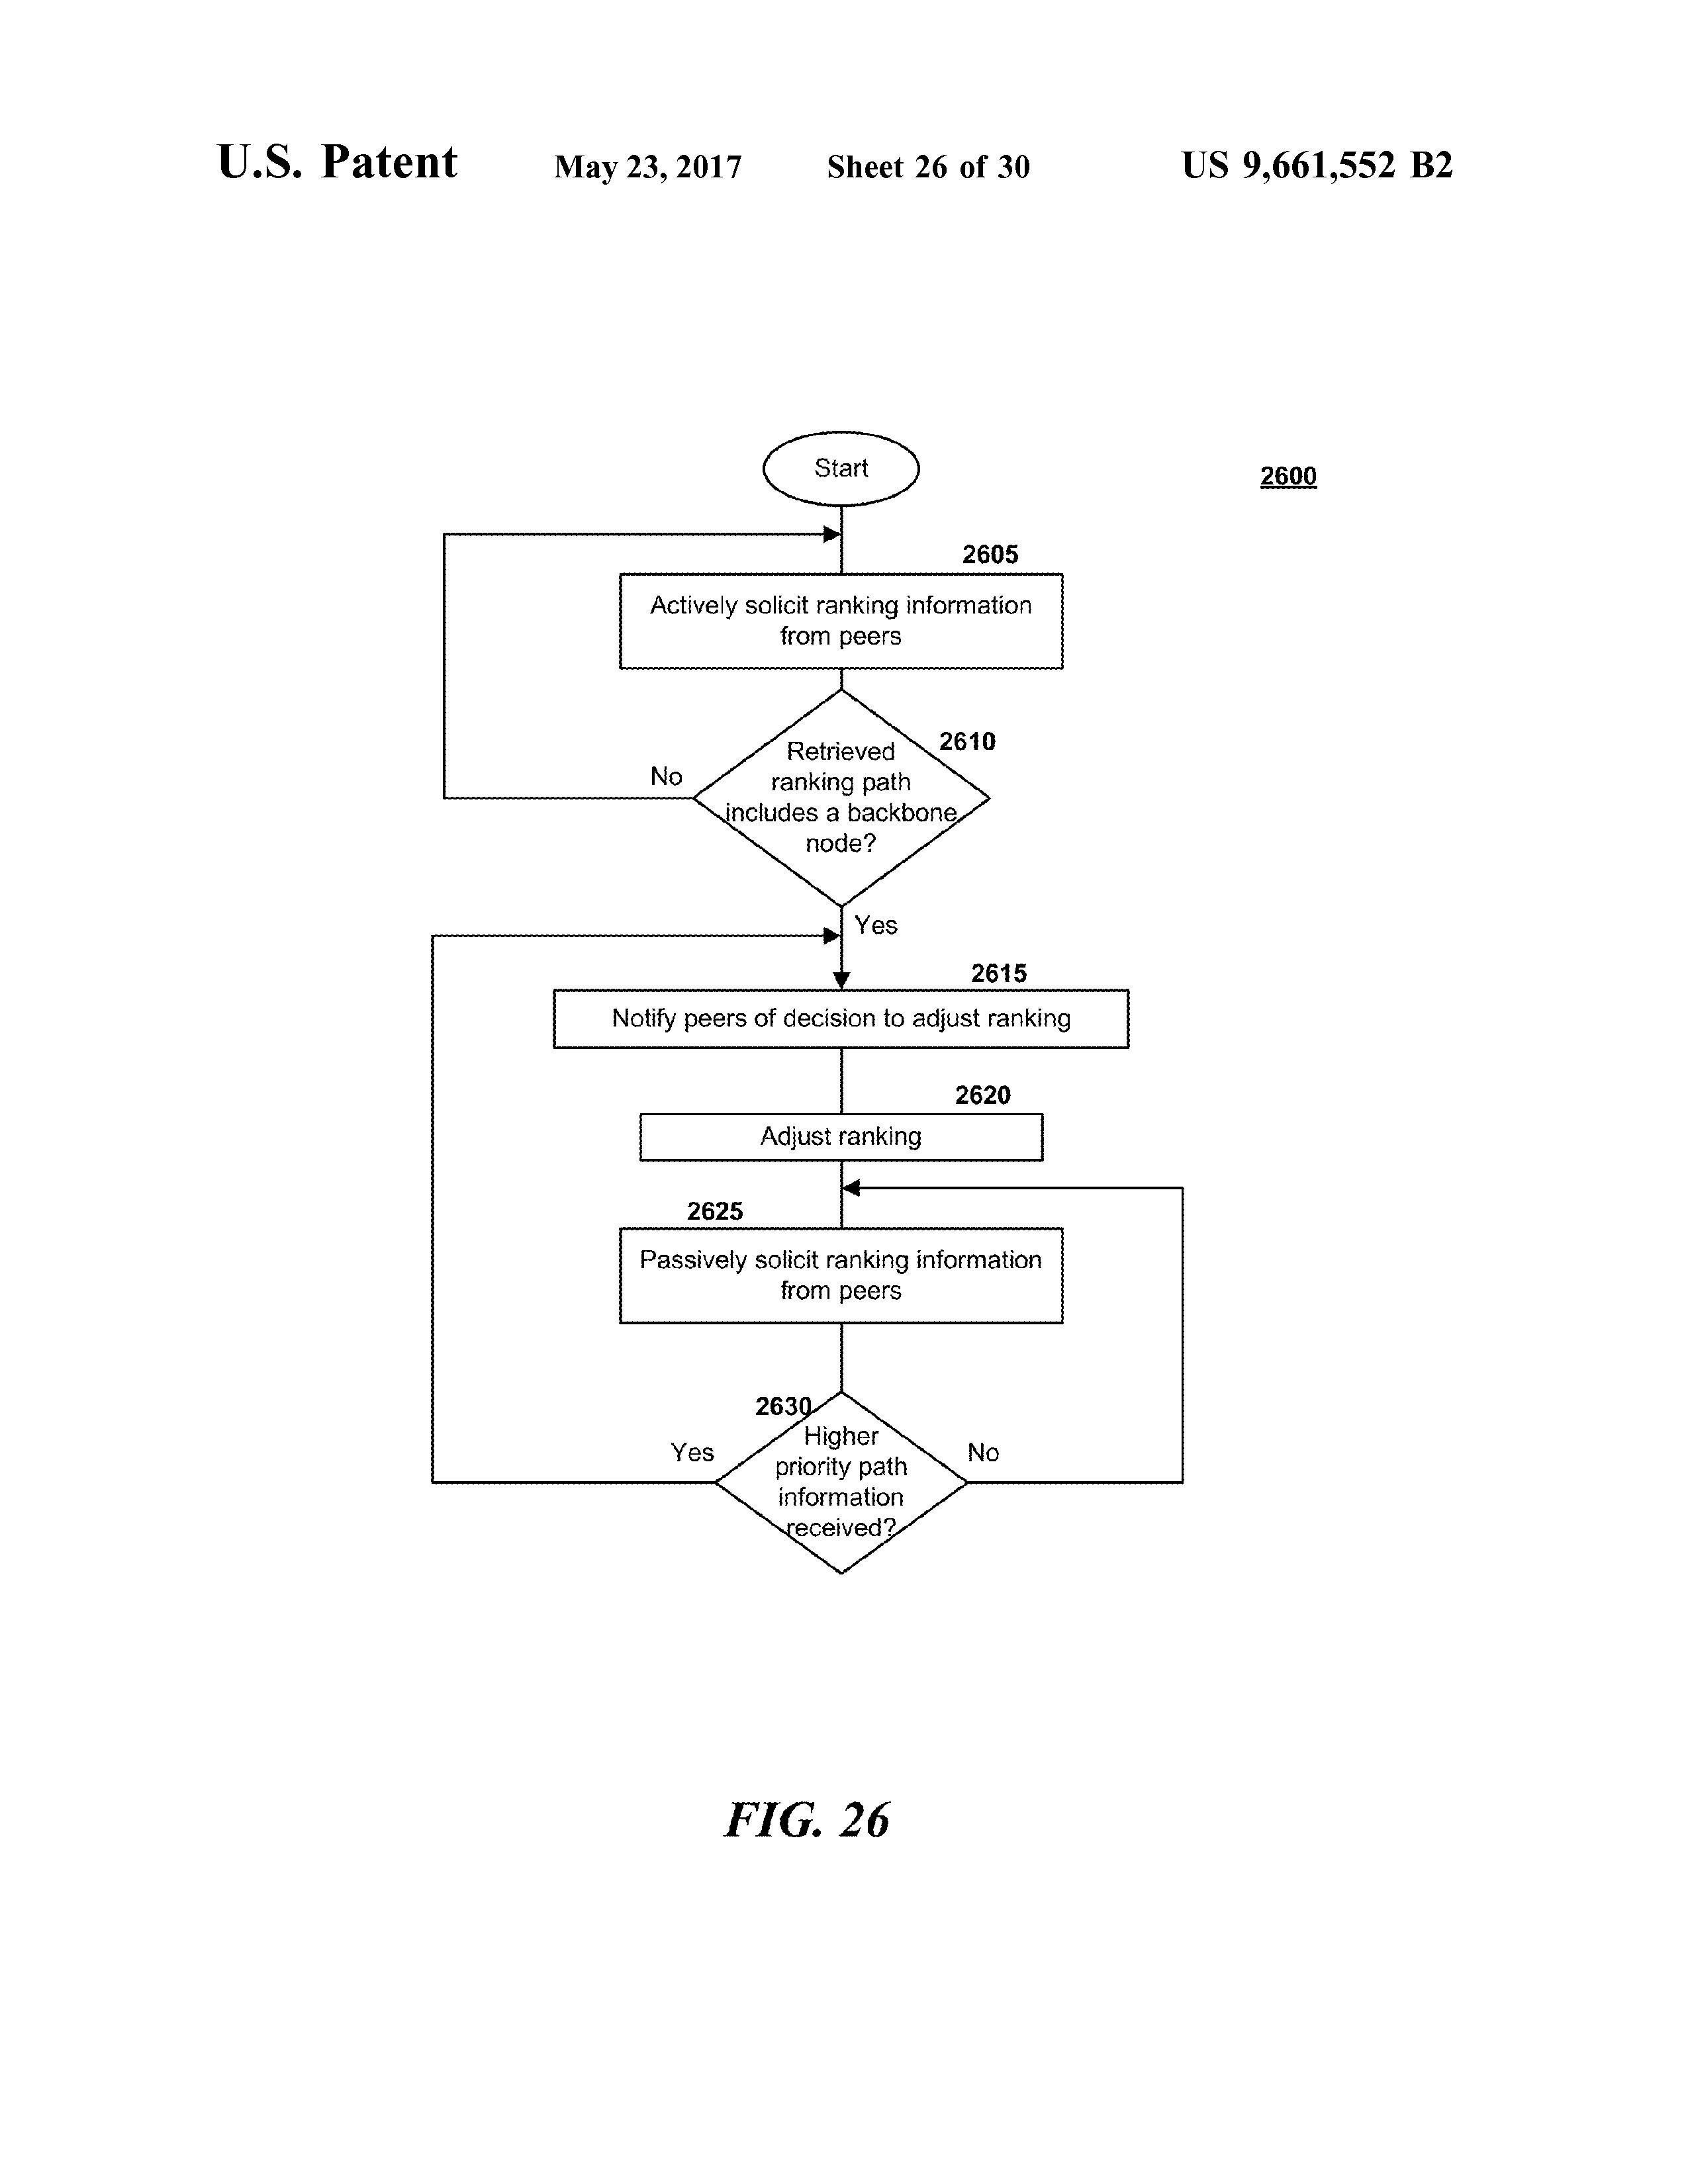 US9661552 ASSOCIATION IN LINE-OF-SIGHT-COMMUNICATION NETWORKS